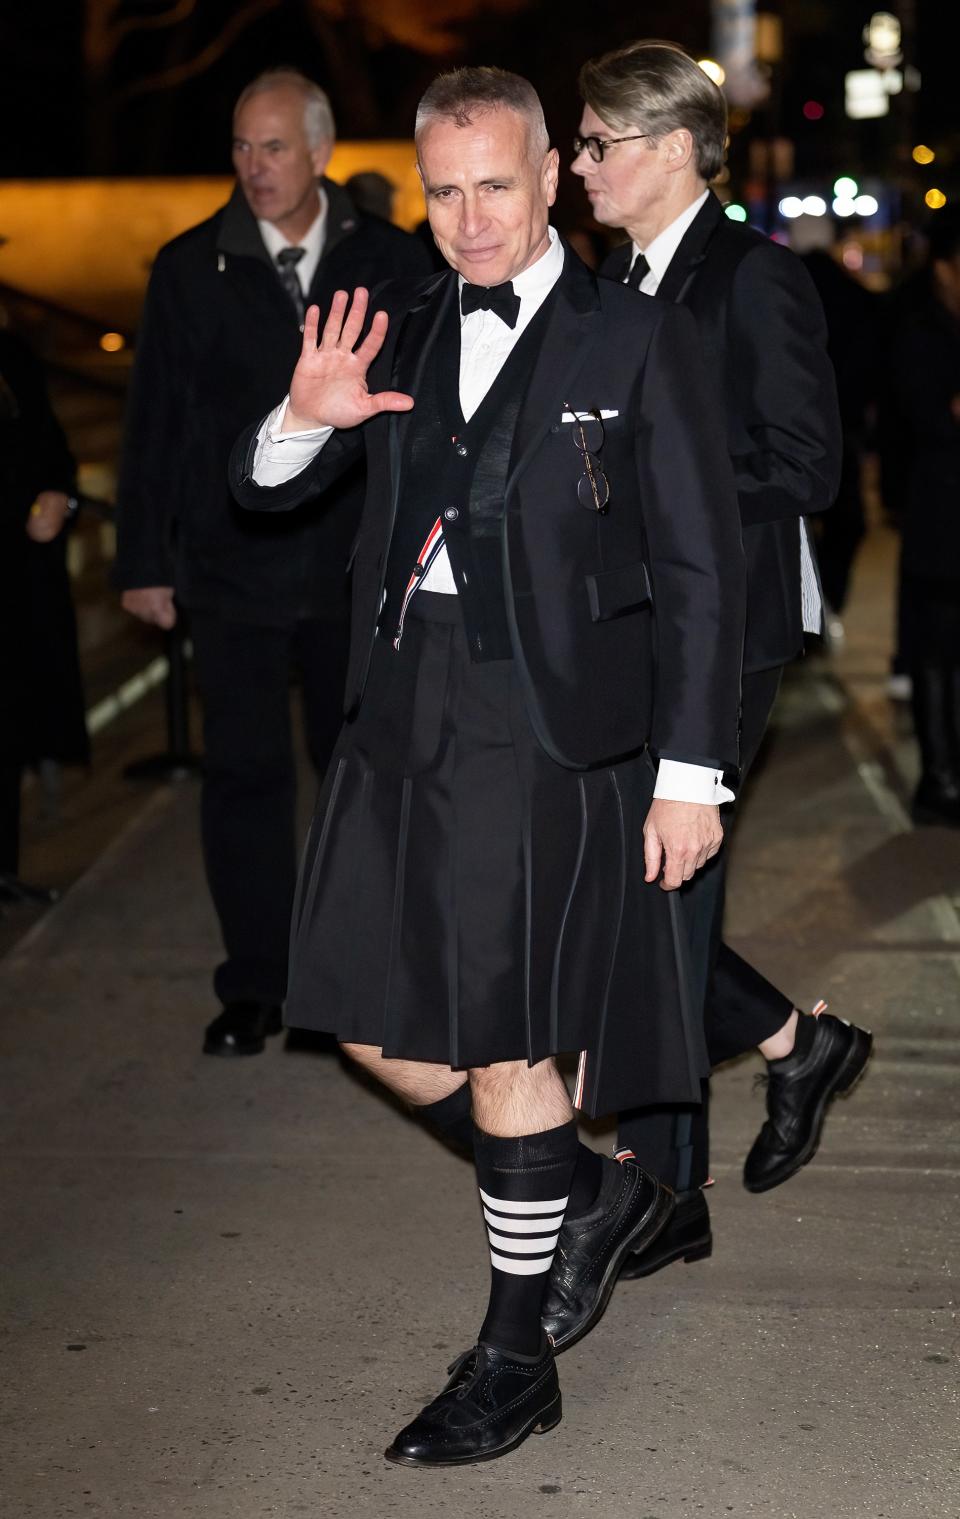 NEW YORK, NEW YORK - NOVEMBER 06: Fashion designer Thom Browne is seen arriving to the 2023 CFDA Fashion Awards at American Museum of Natural History on November 06, 2023 in New York City. (Photo by Gilbert Carrasquillo/GC Images)